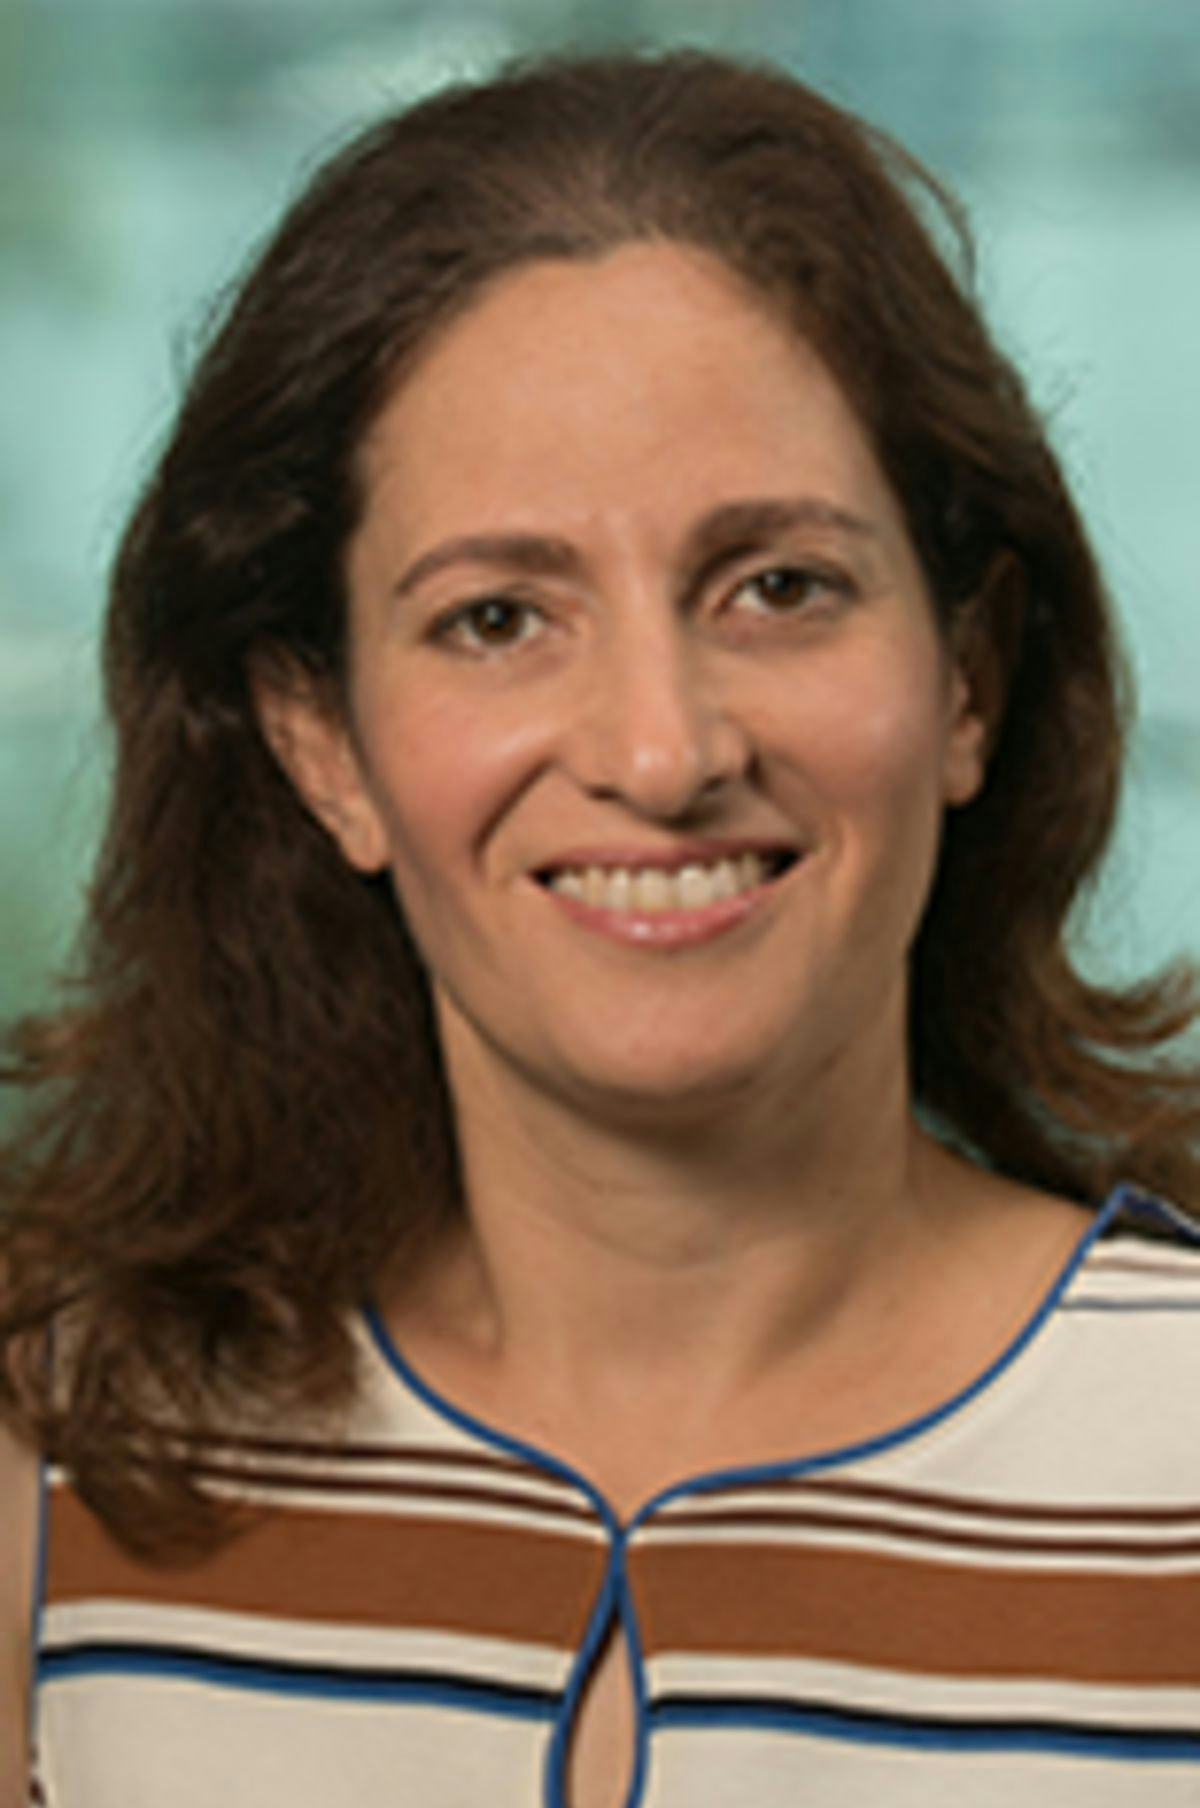 Headshot of Dr. Joelle Saad-Lessler in a striped dress with the Manhattan skyline in the background.